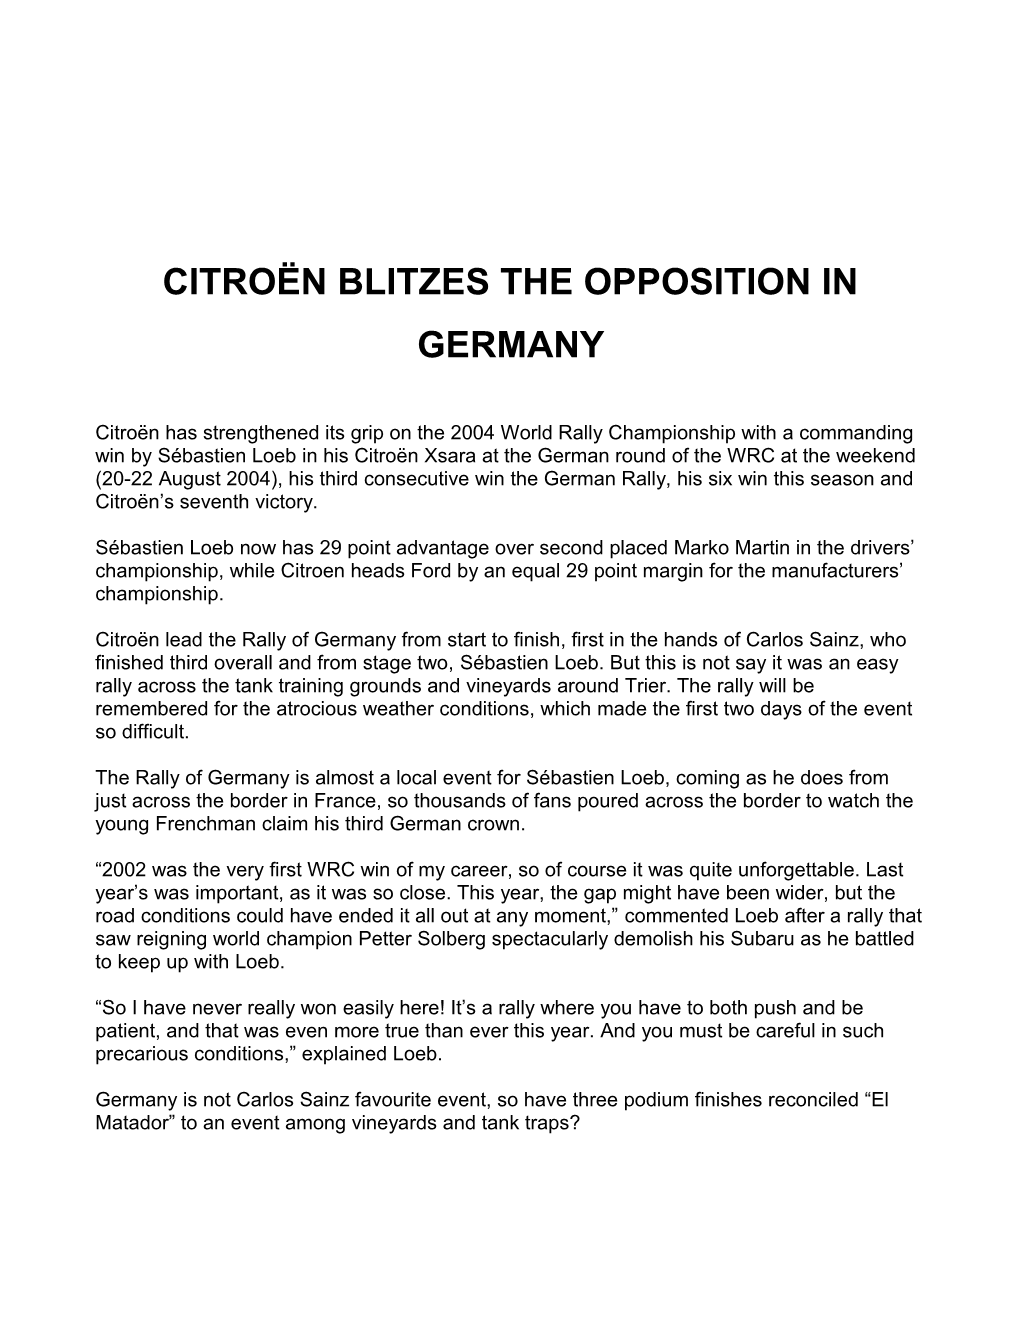 Citroën Blitzes the Opposition in Germany